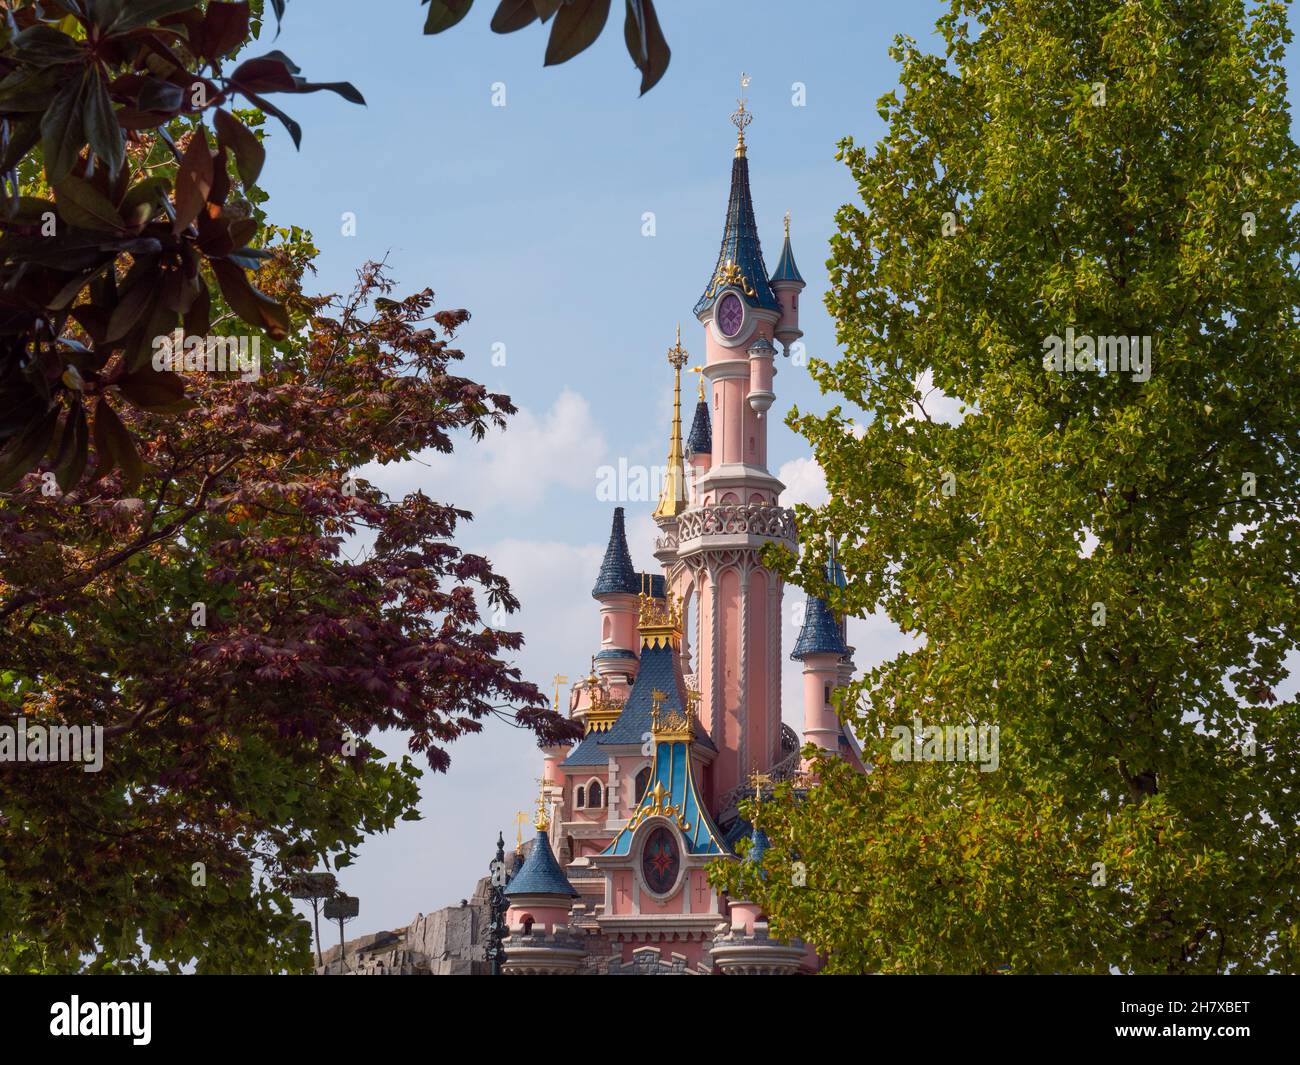 Paris, France; September 2019: Disney castle among the trees in the park Stock Photo